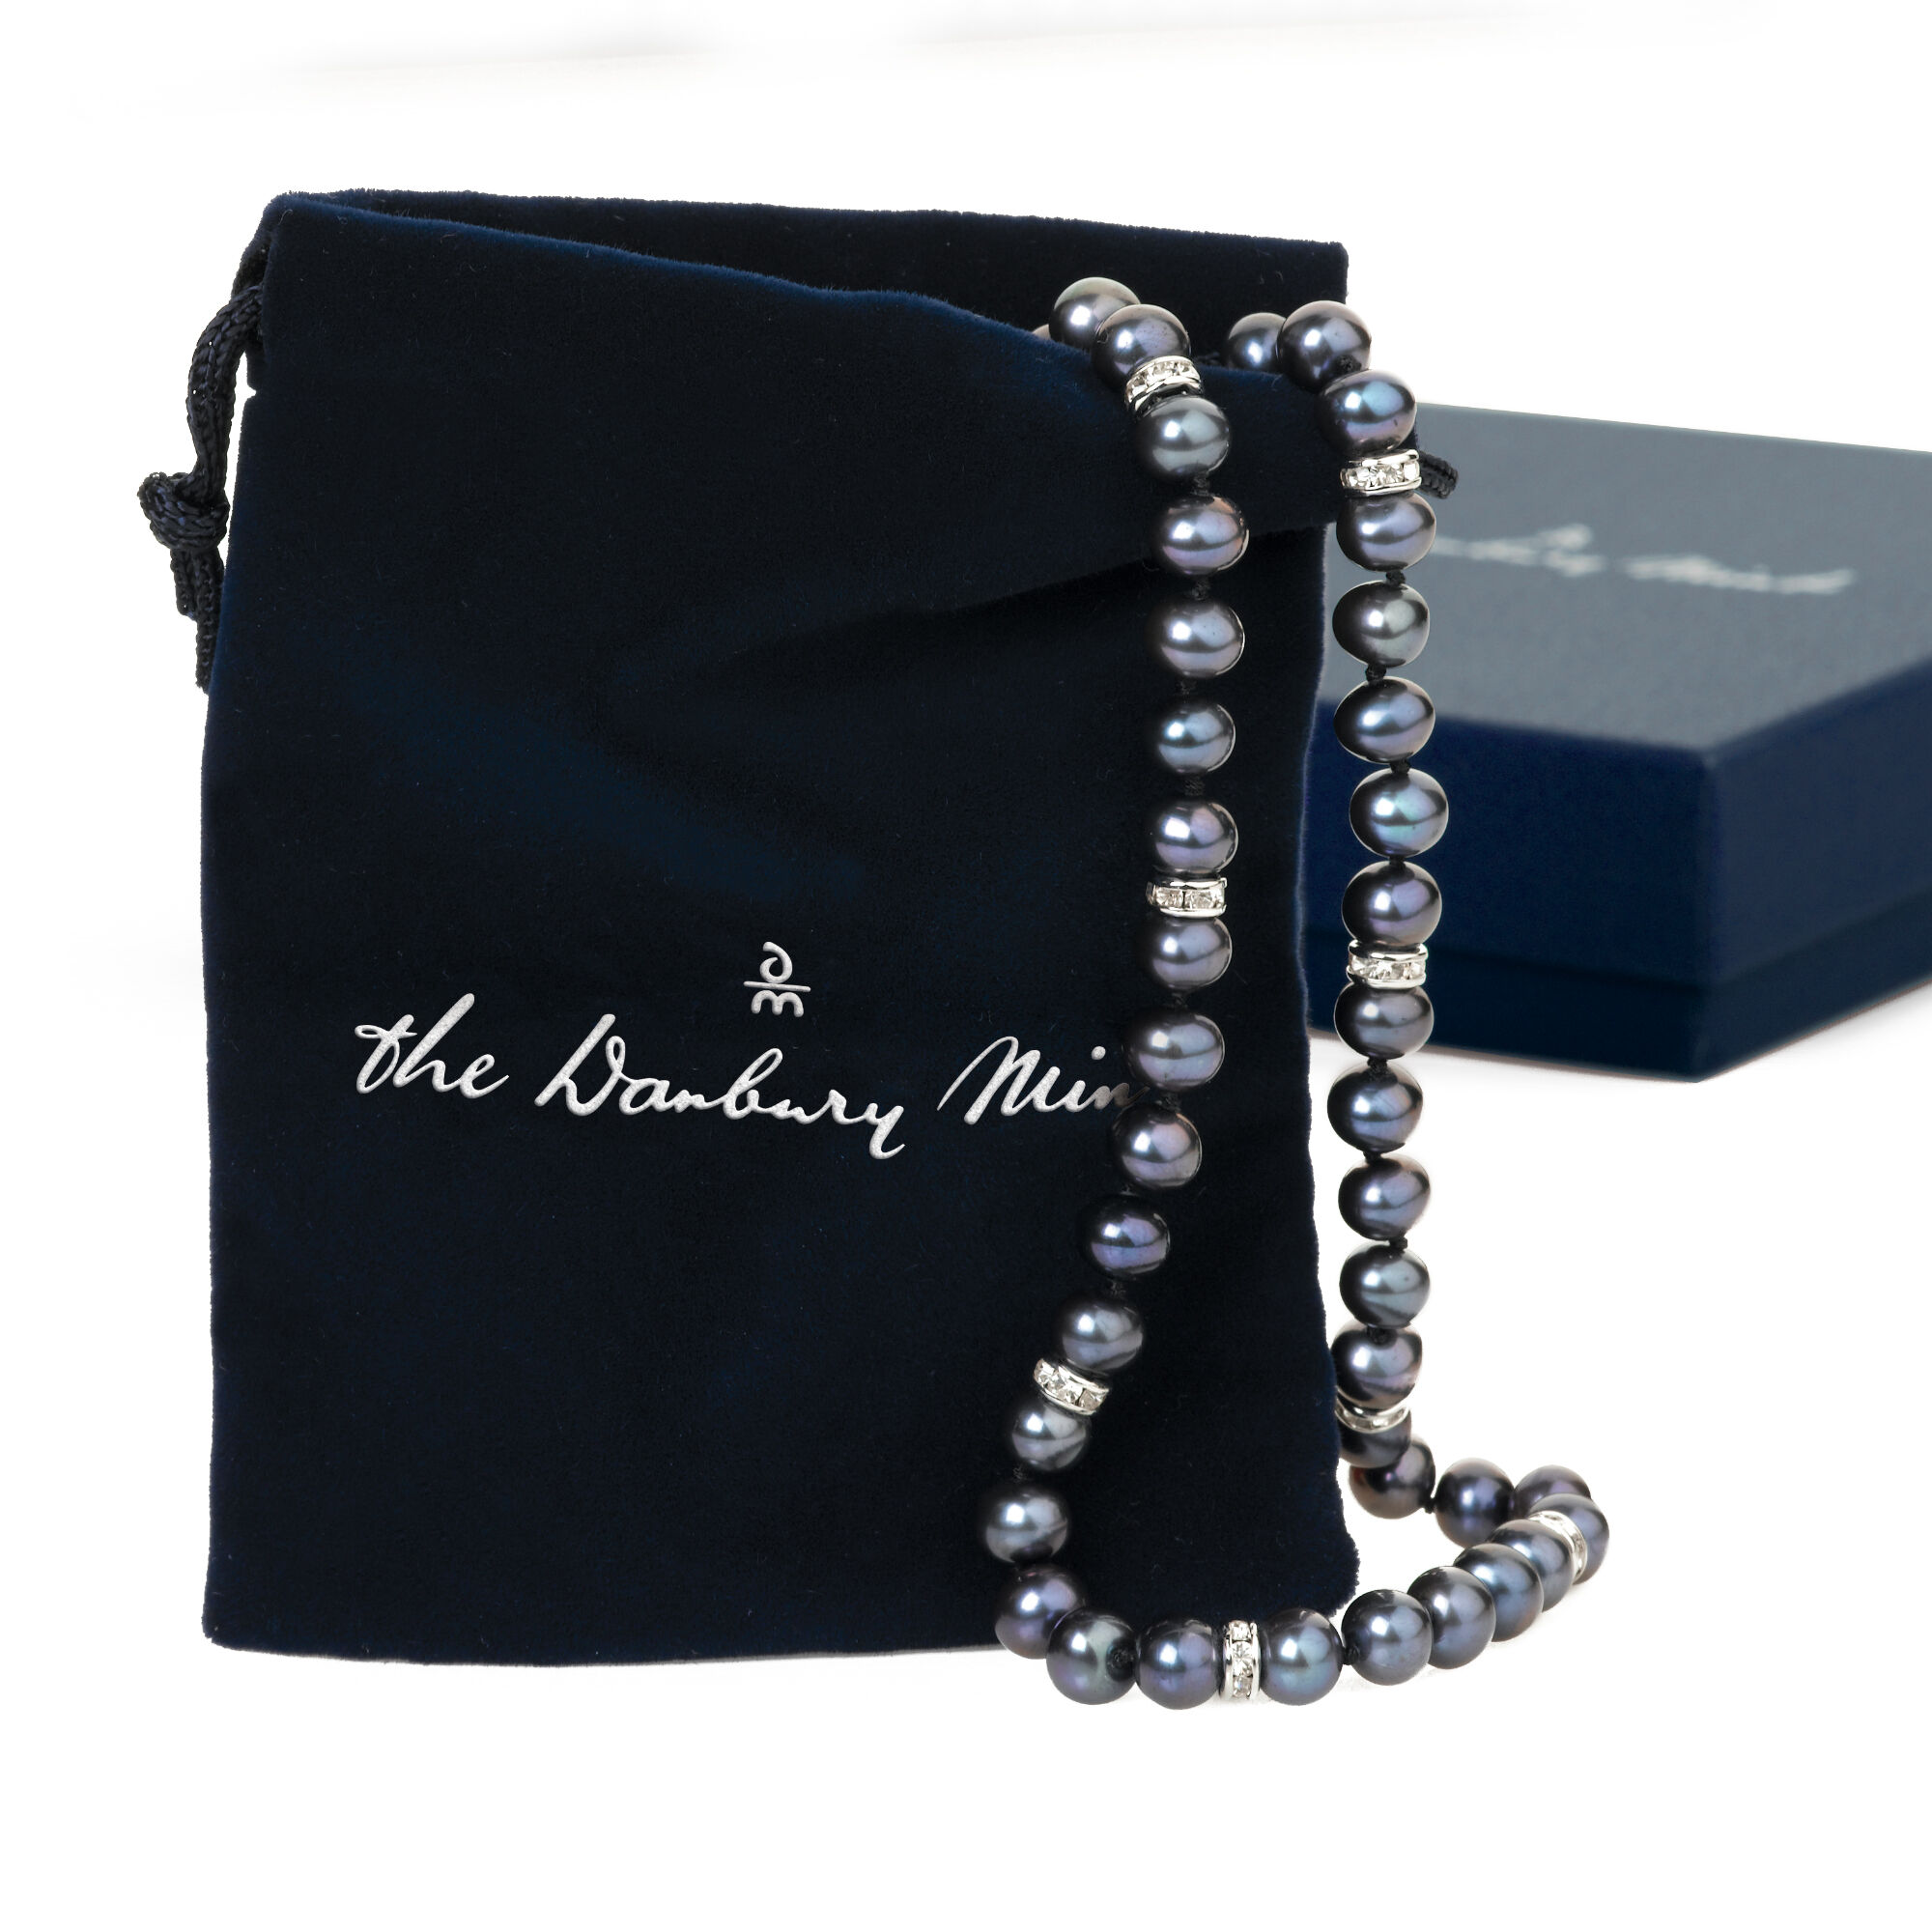 Midnight Spell Black Pearl Necklace 1333 0337 g gift pouch box